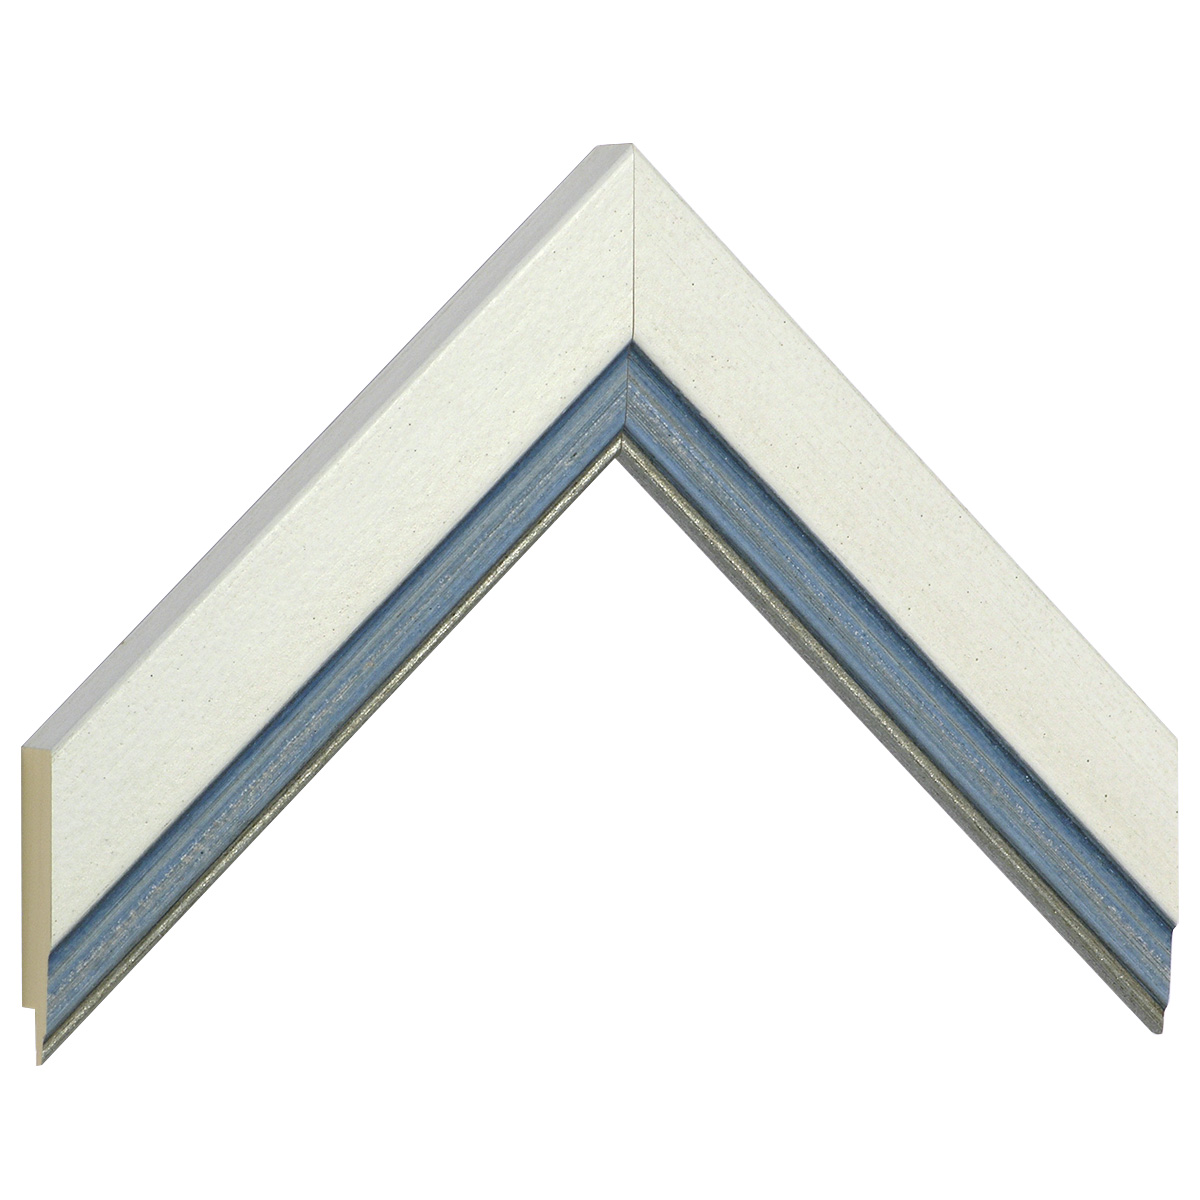 Moulding ayous 39mm width - cream with blue edge - Sample